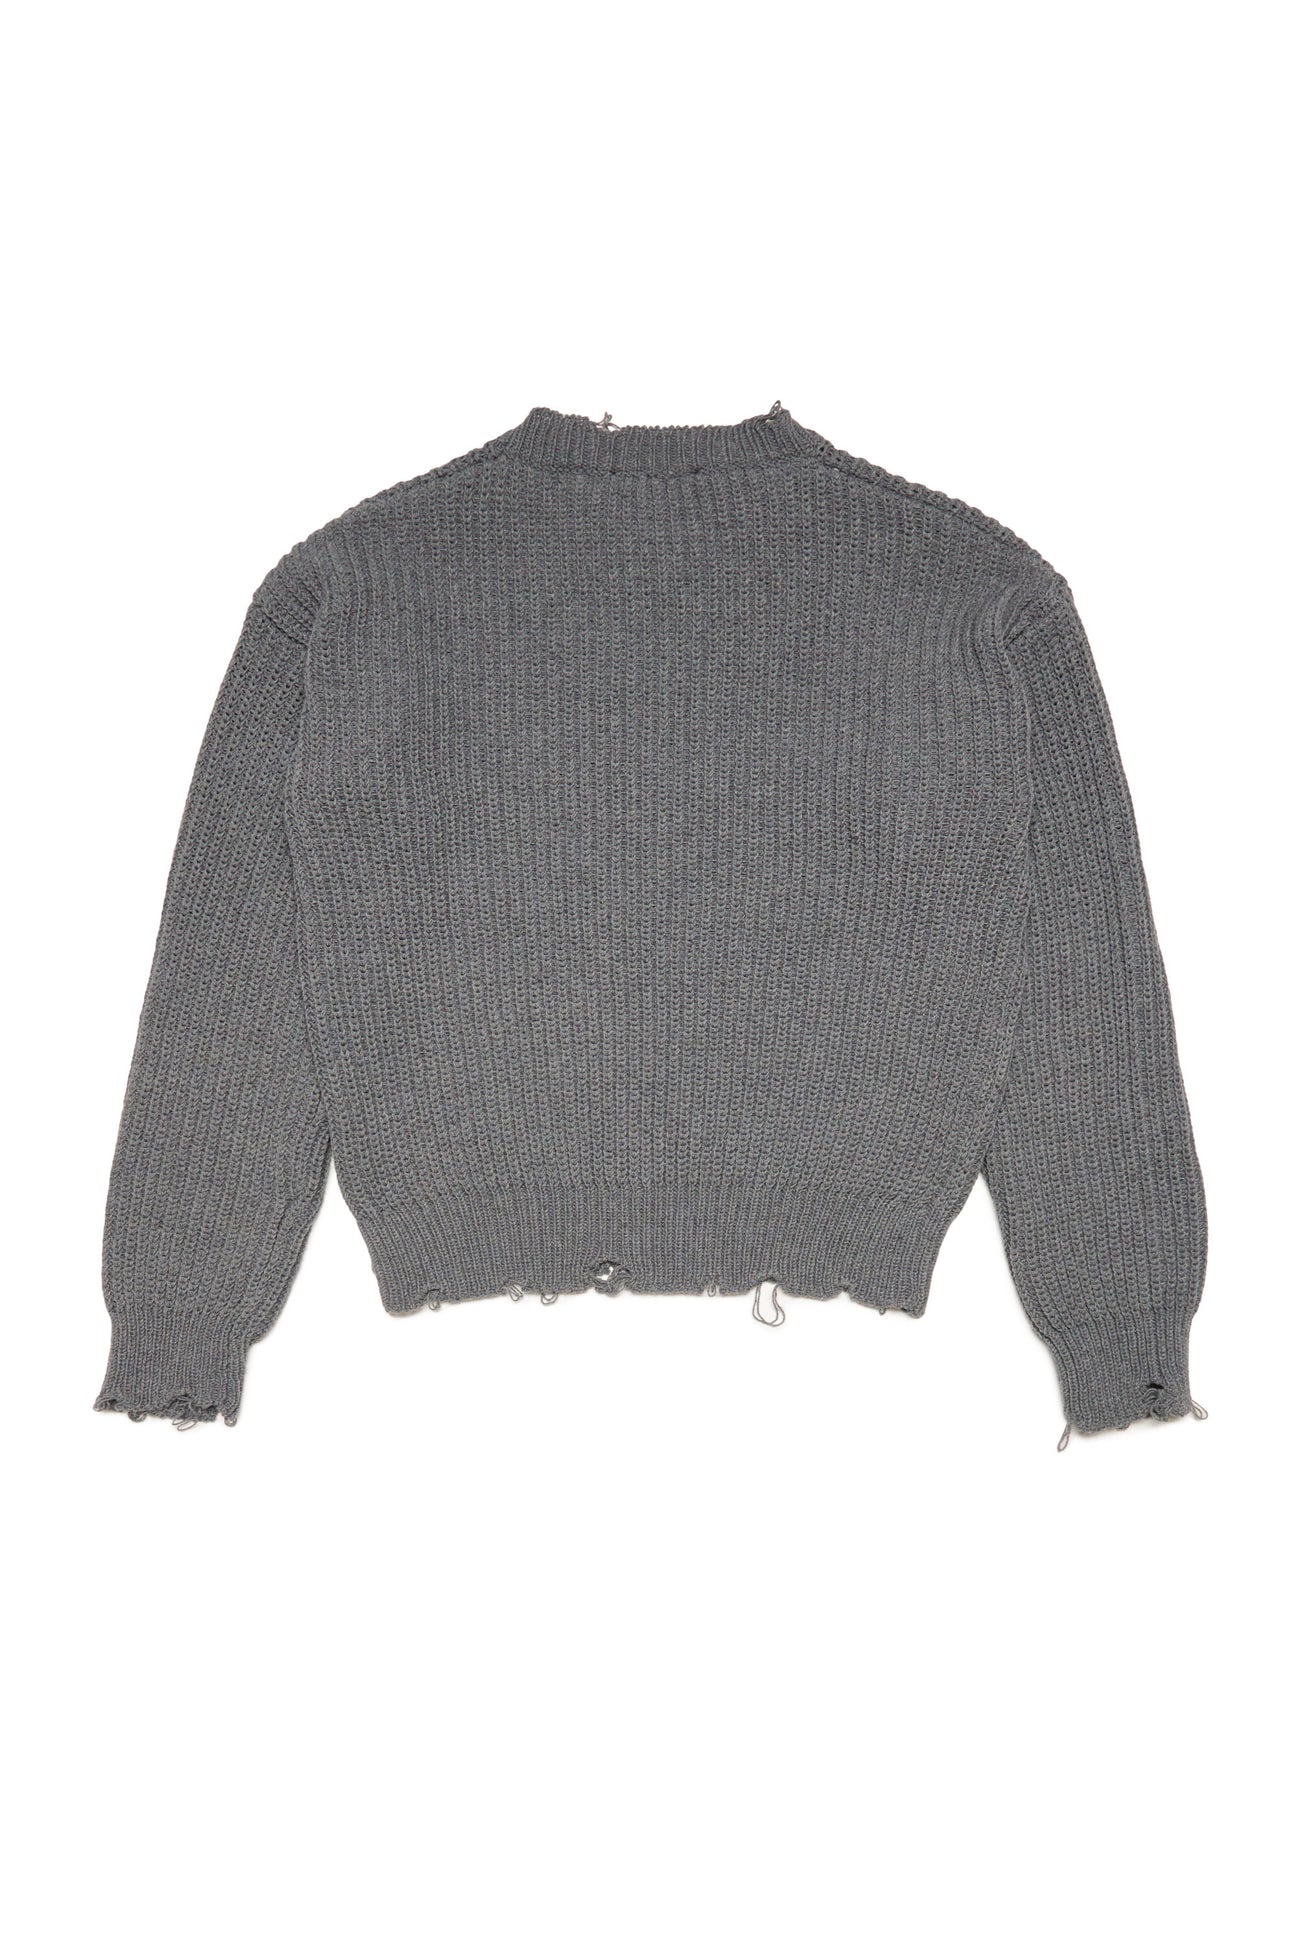 Cotton-blend crew-neck sweater with breaks and logo Cotton-blend crew-neck sweater with breaks and logo